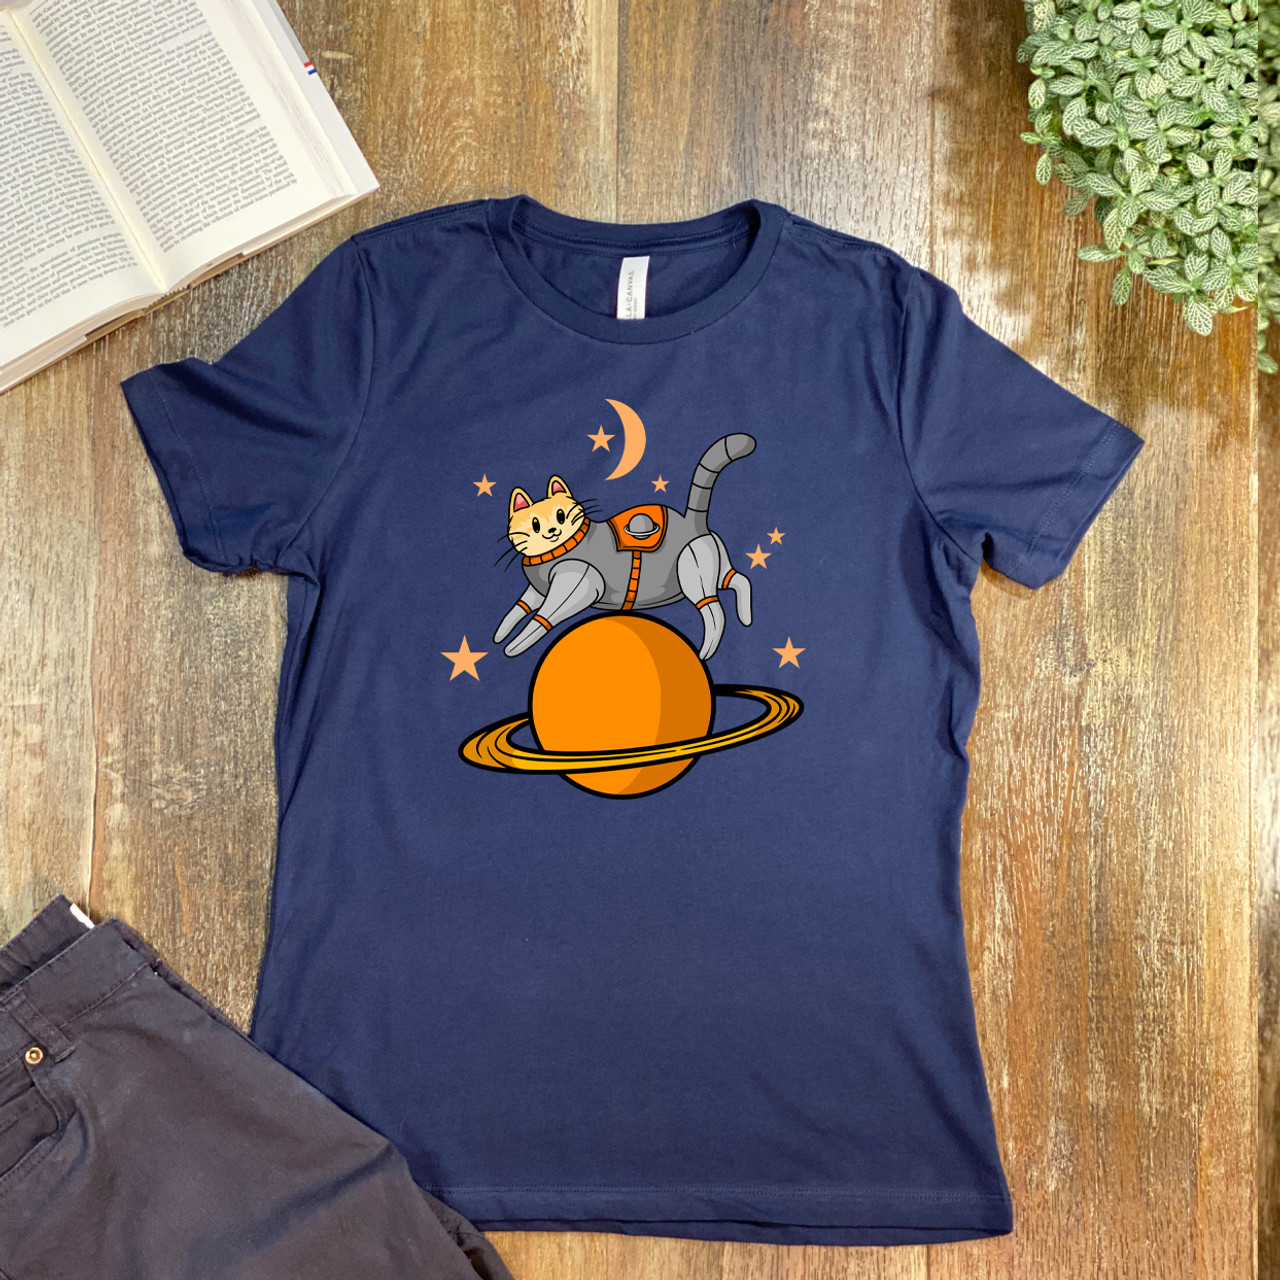 Navy Tabby Cat on Orange Planet Women's Relaxed T-Shirt - Bella + Canvas 6400